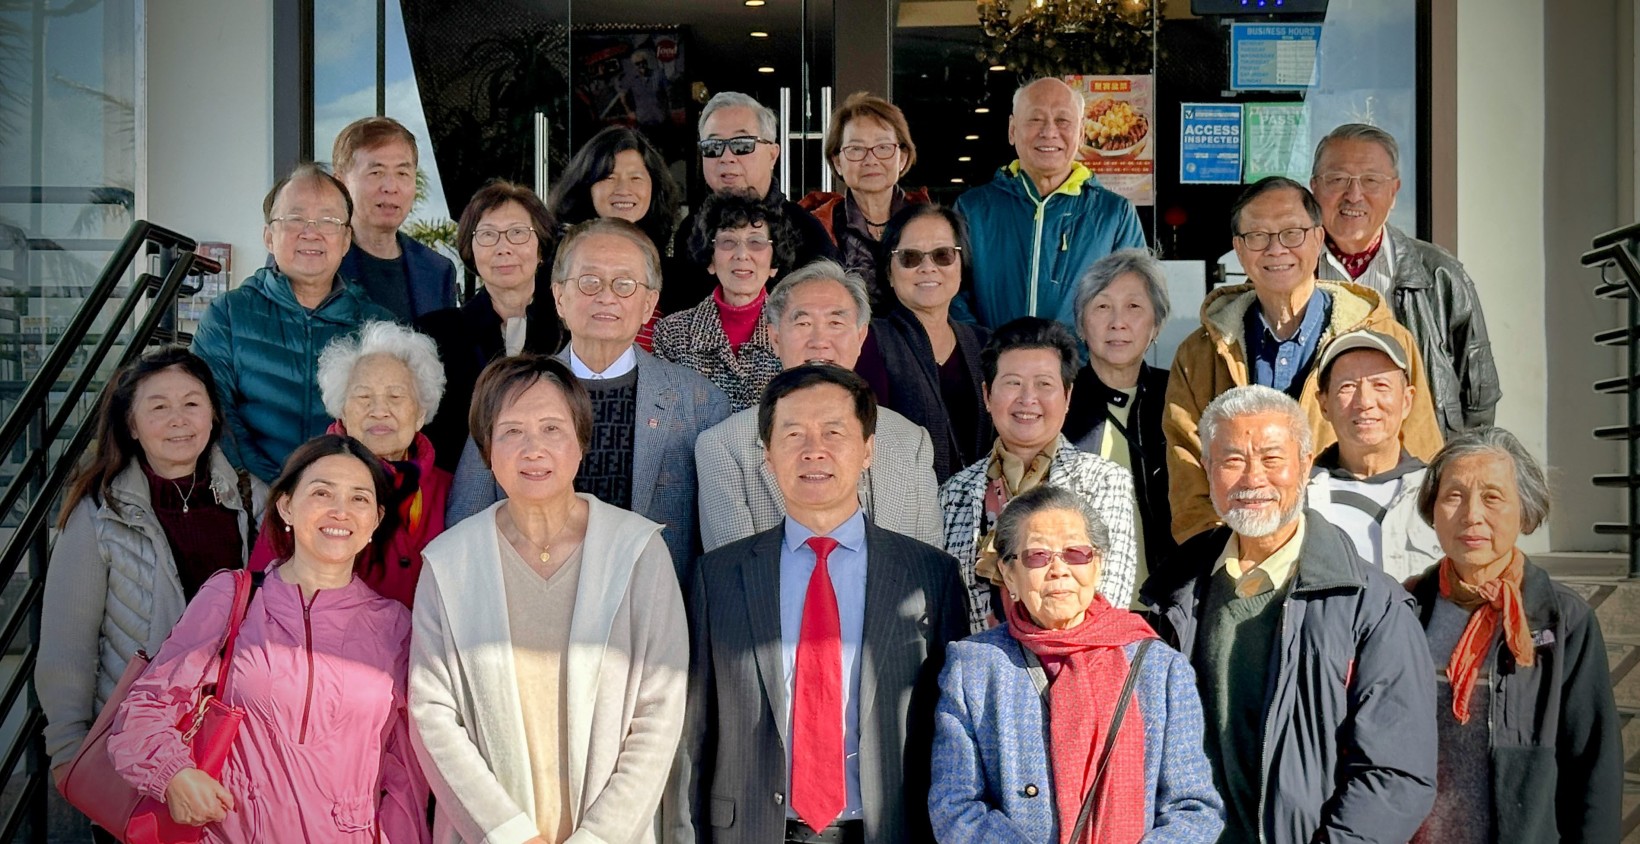 President Qin shares the latest developments of Lingnan University with alumni from the Lingnan Alumni Association in San Francisco.